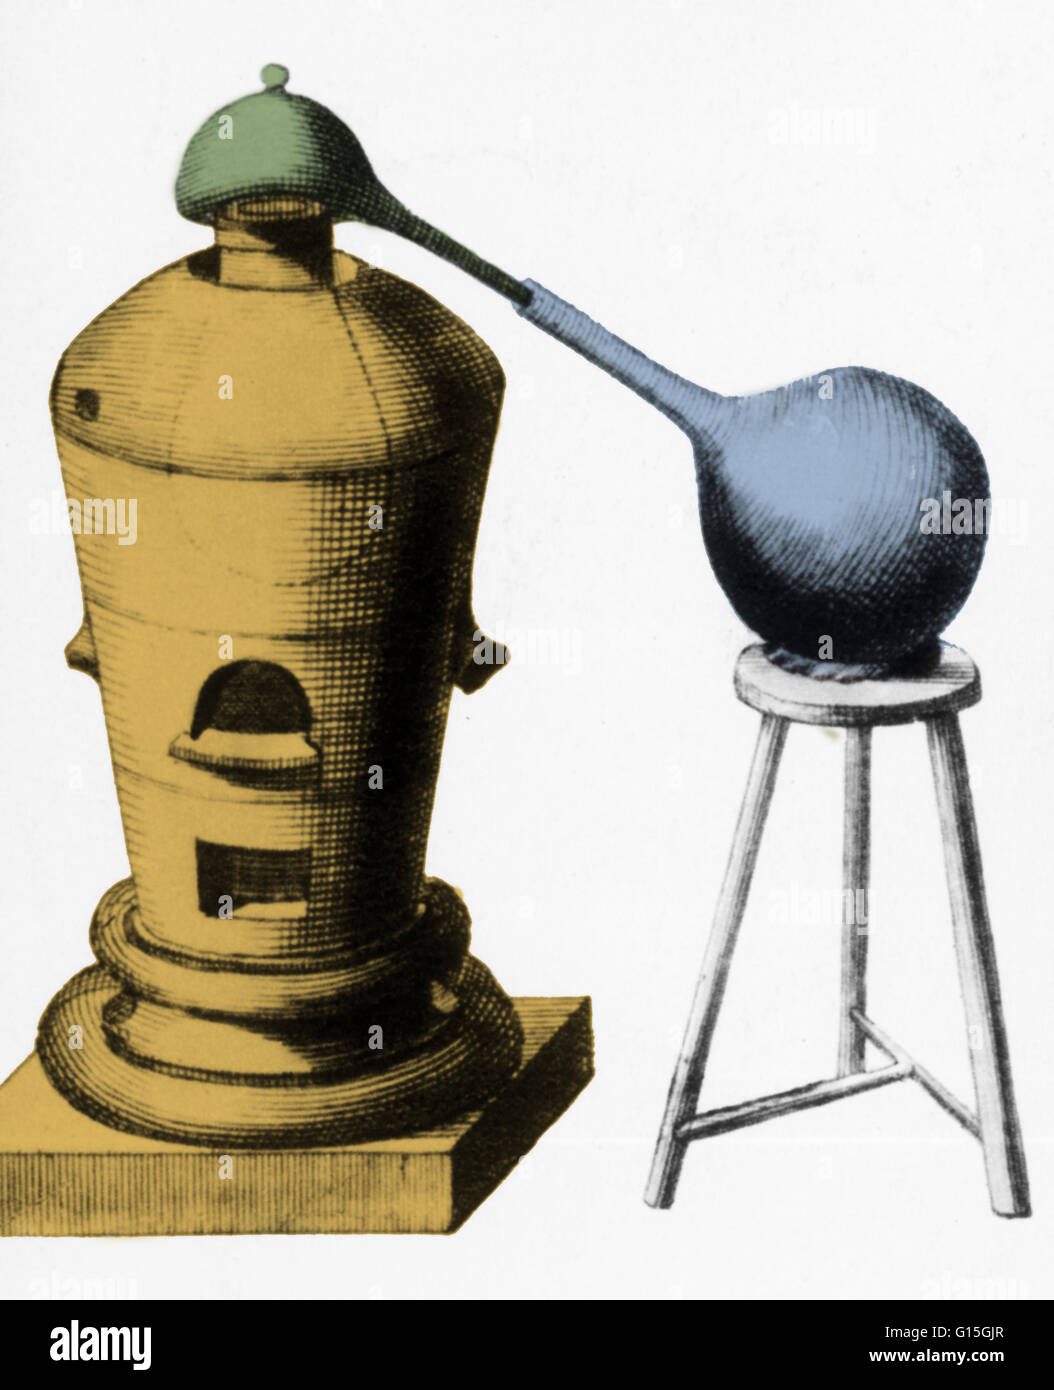 Different types of apparatus used by 18th century chemists. Shown here is an alembic, or distilling appartus, which still held an honorable place in chemistry, and was used to separate substances into their constituent parts. Stock Photo